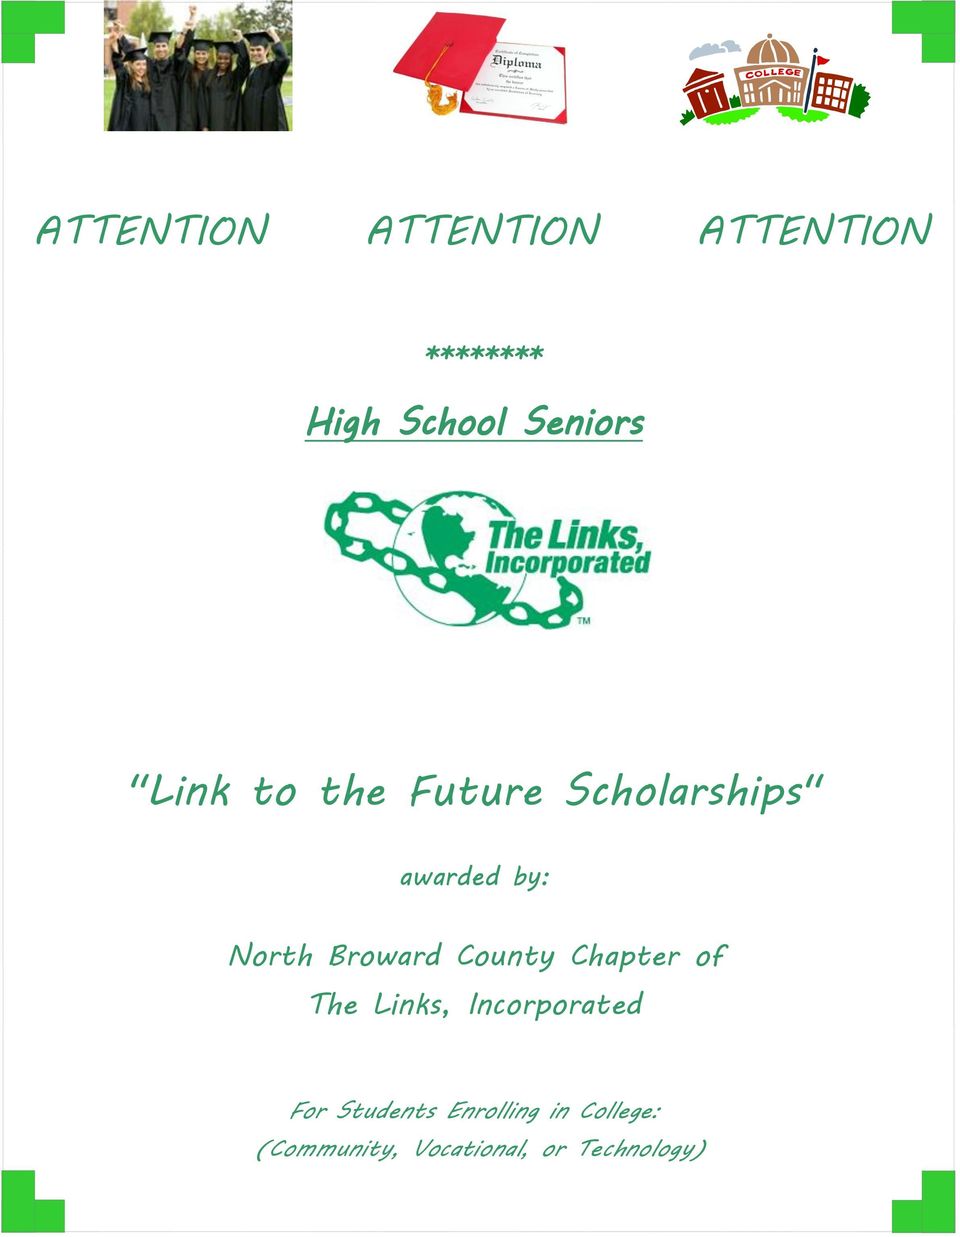 Broward County Chapter of The Links, Incorporated For